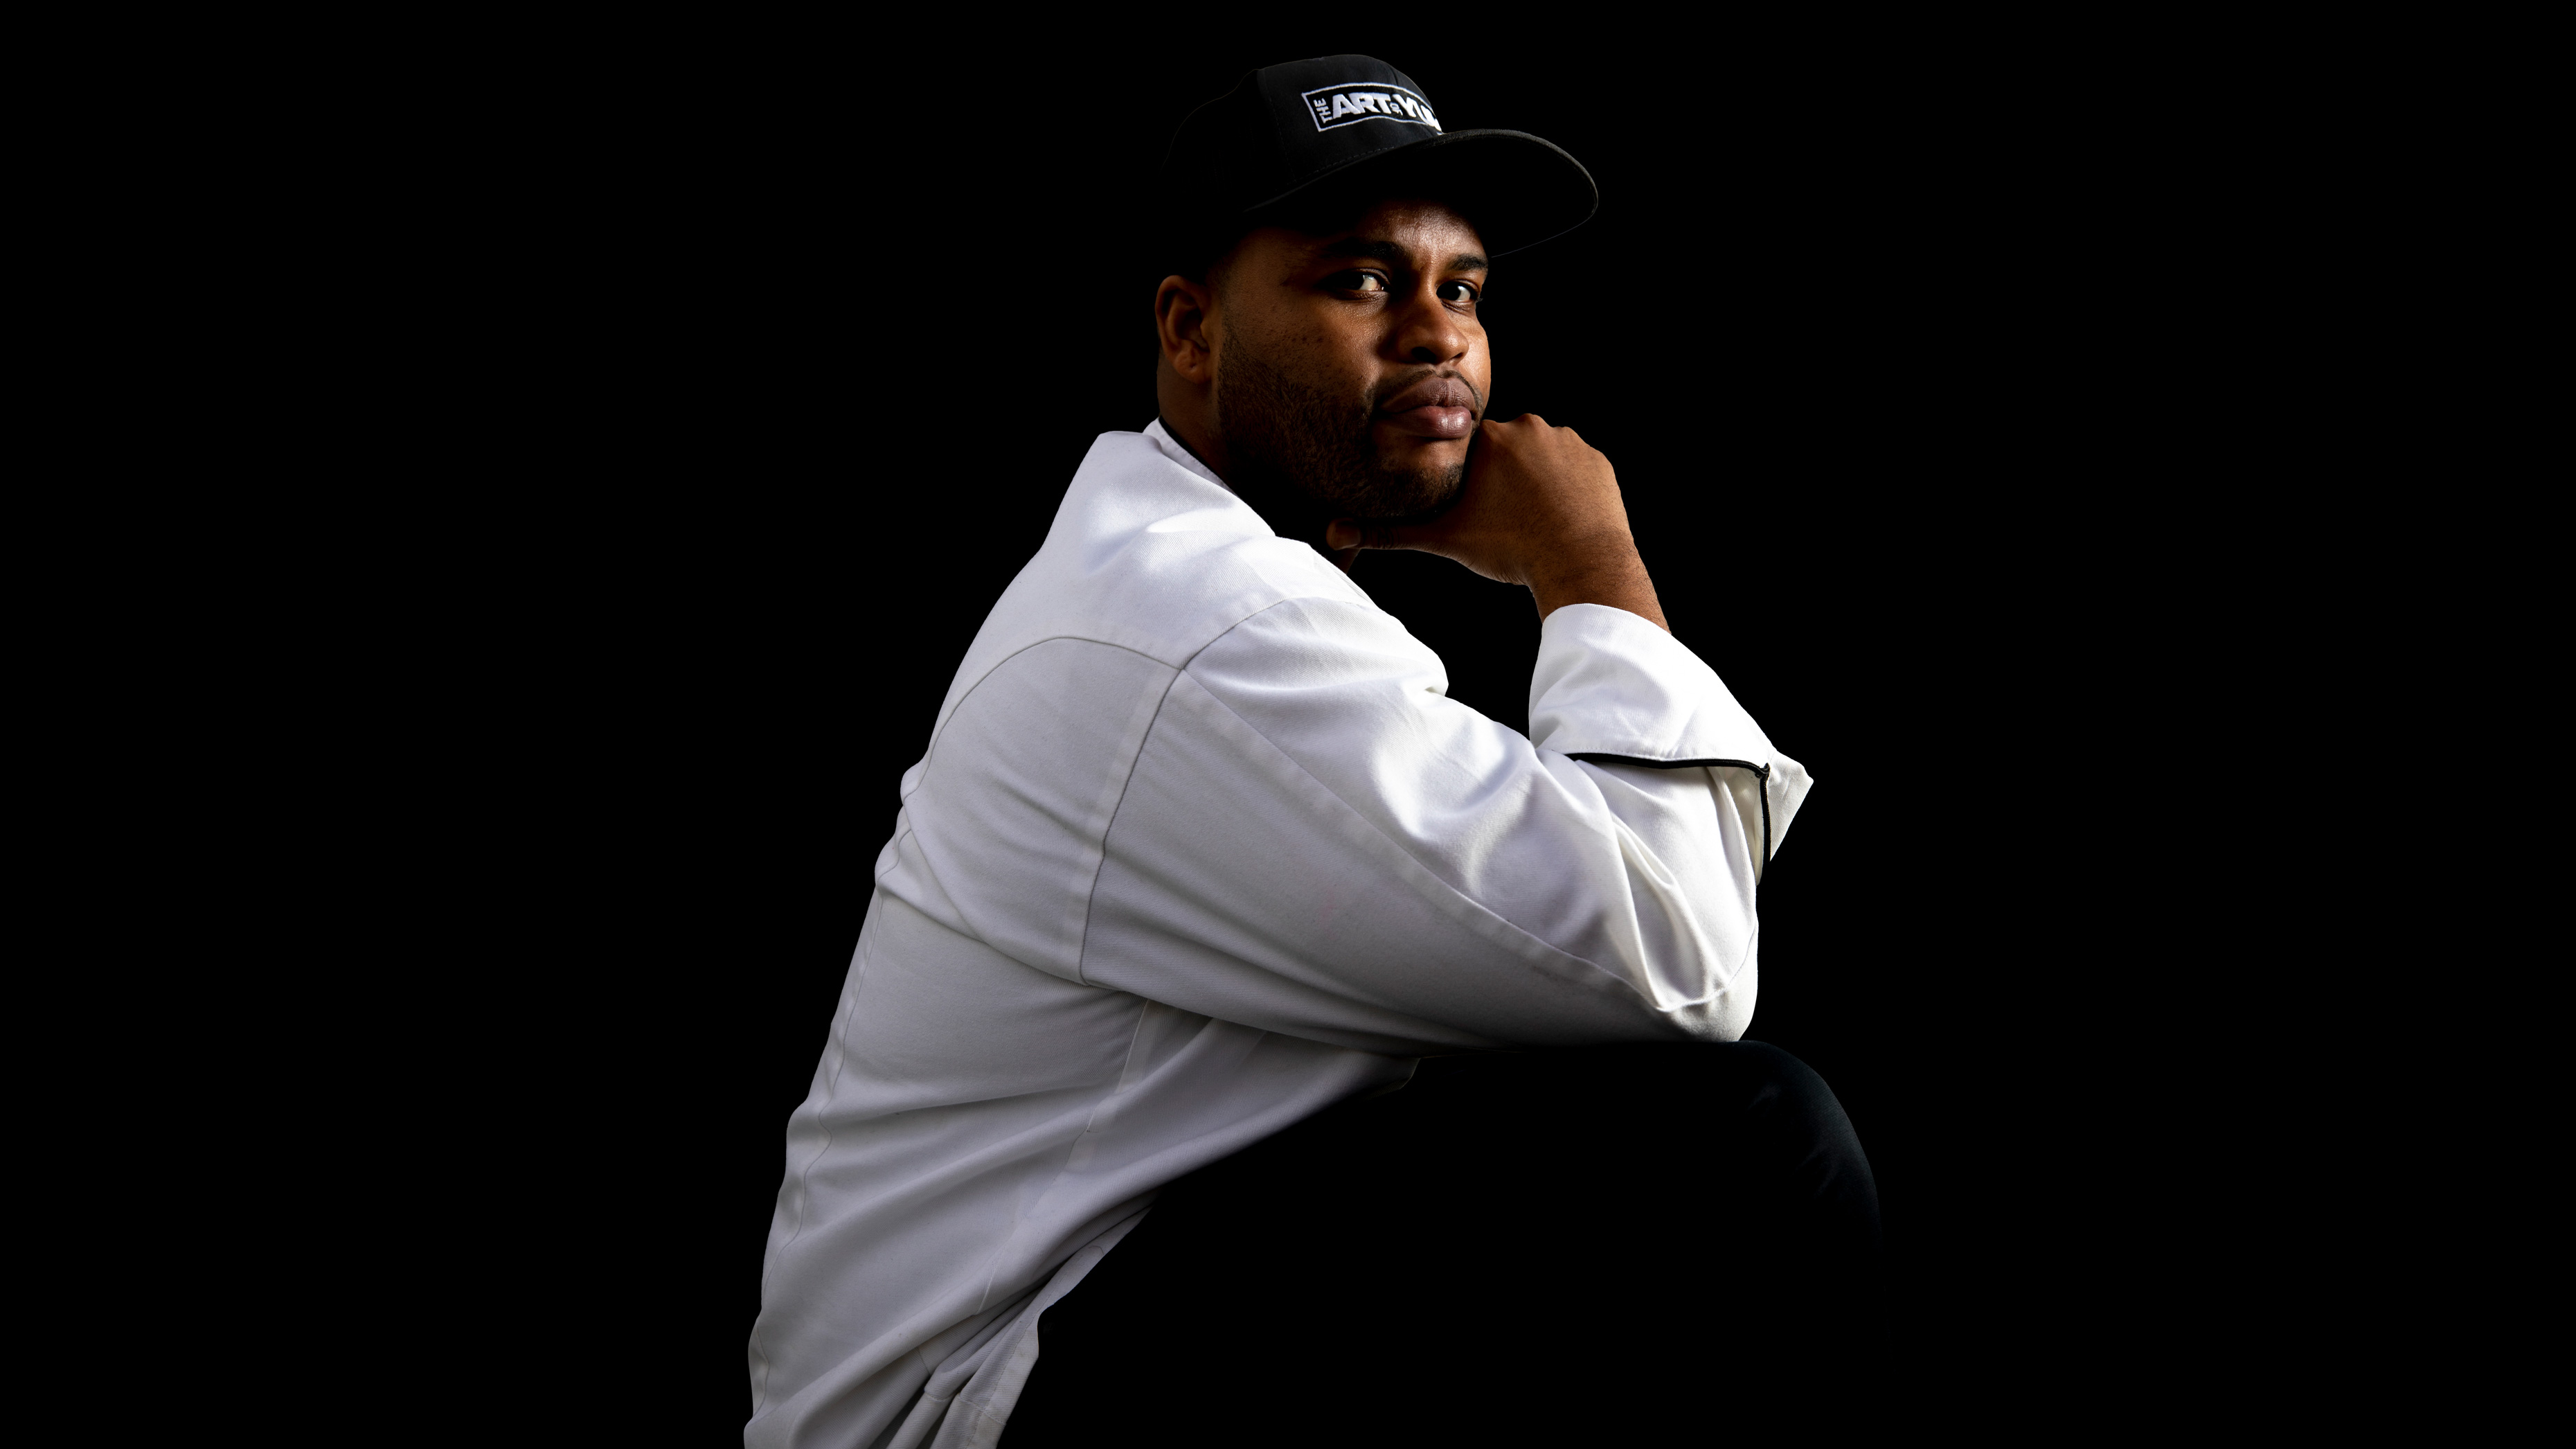 Portrait of The Art Of Yum chef Donte Jones on a black background